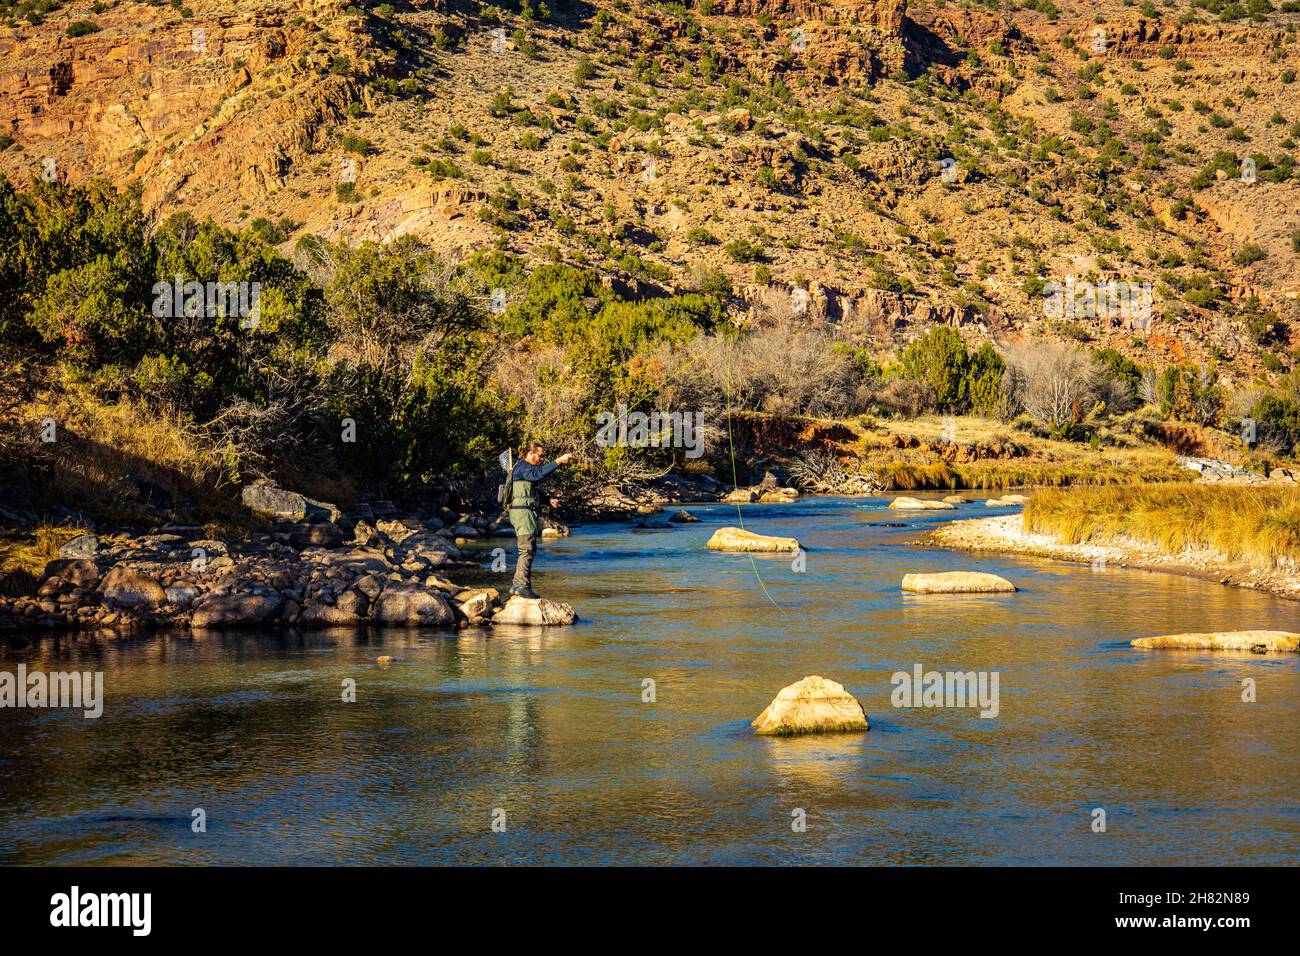 Man fishing on the Chama river downstream from the dam in Abiquiu New Mexico, USA Stock Photo